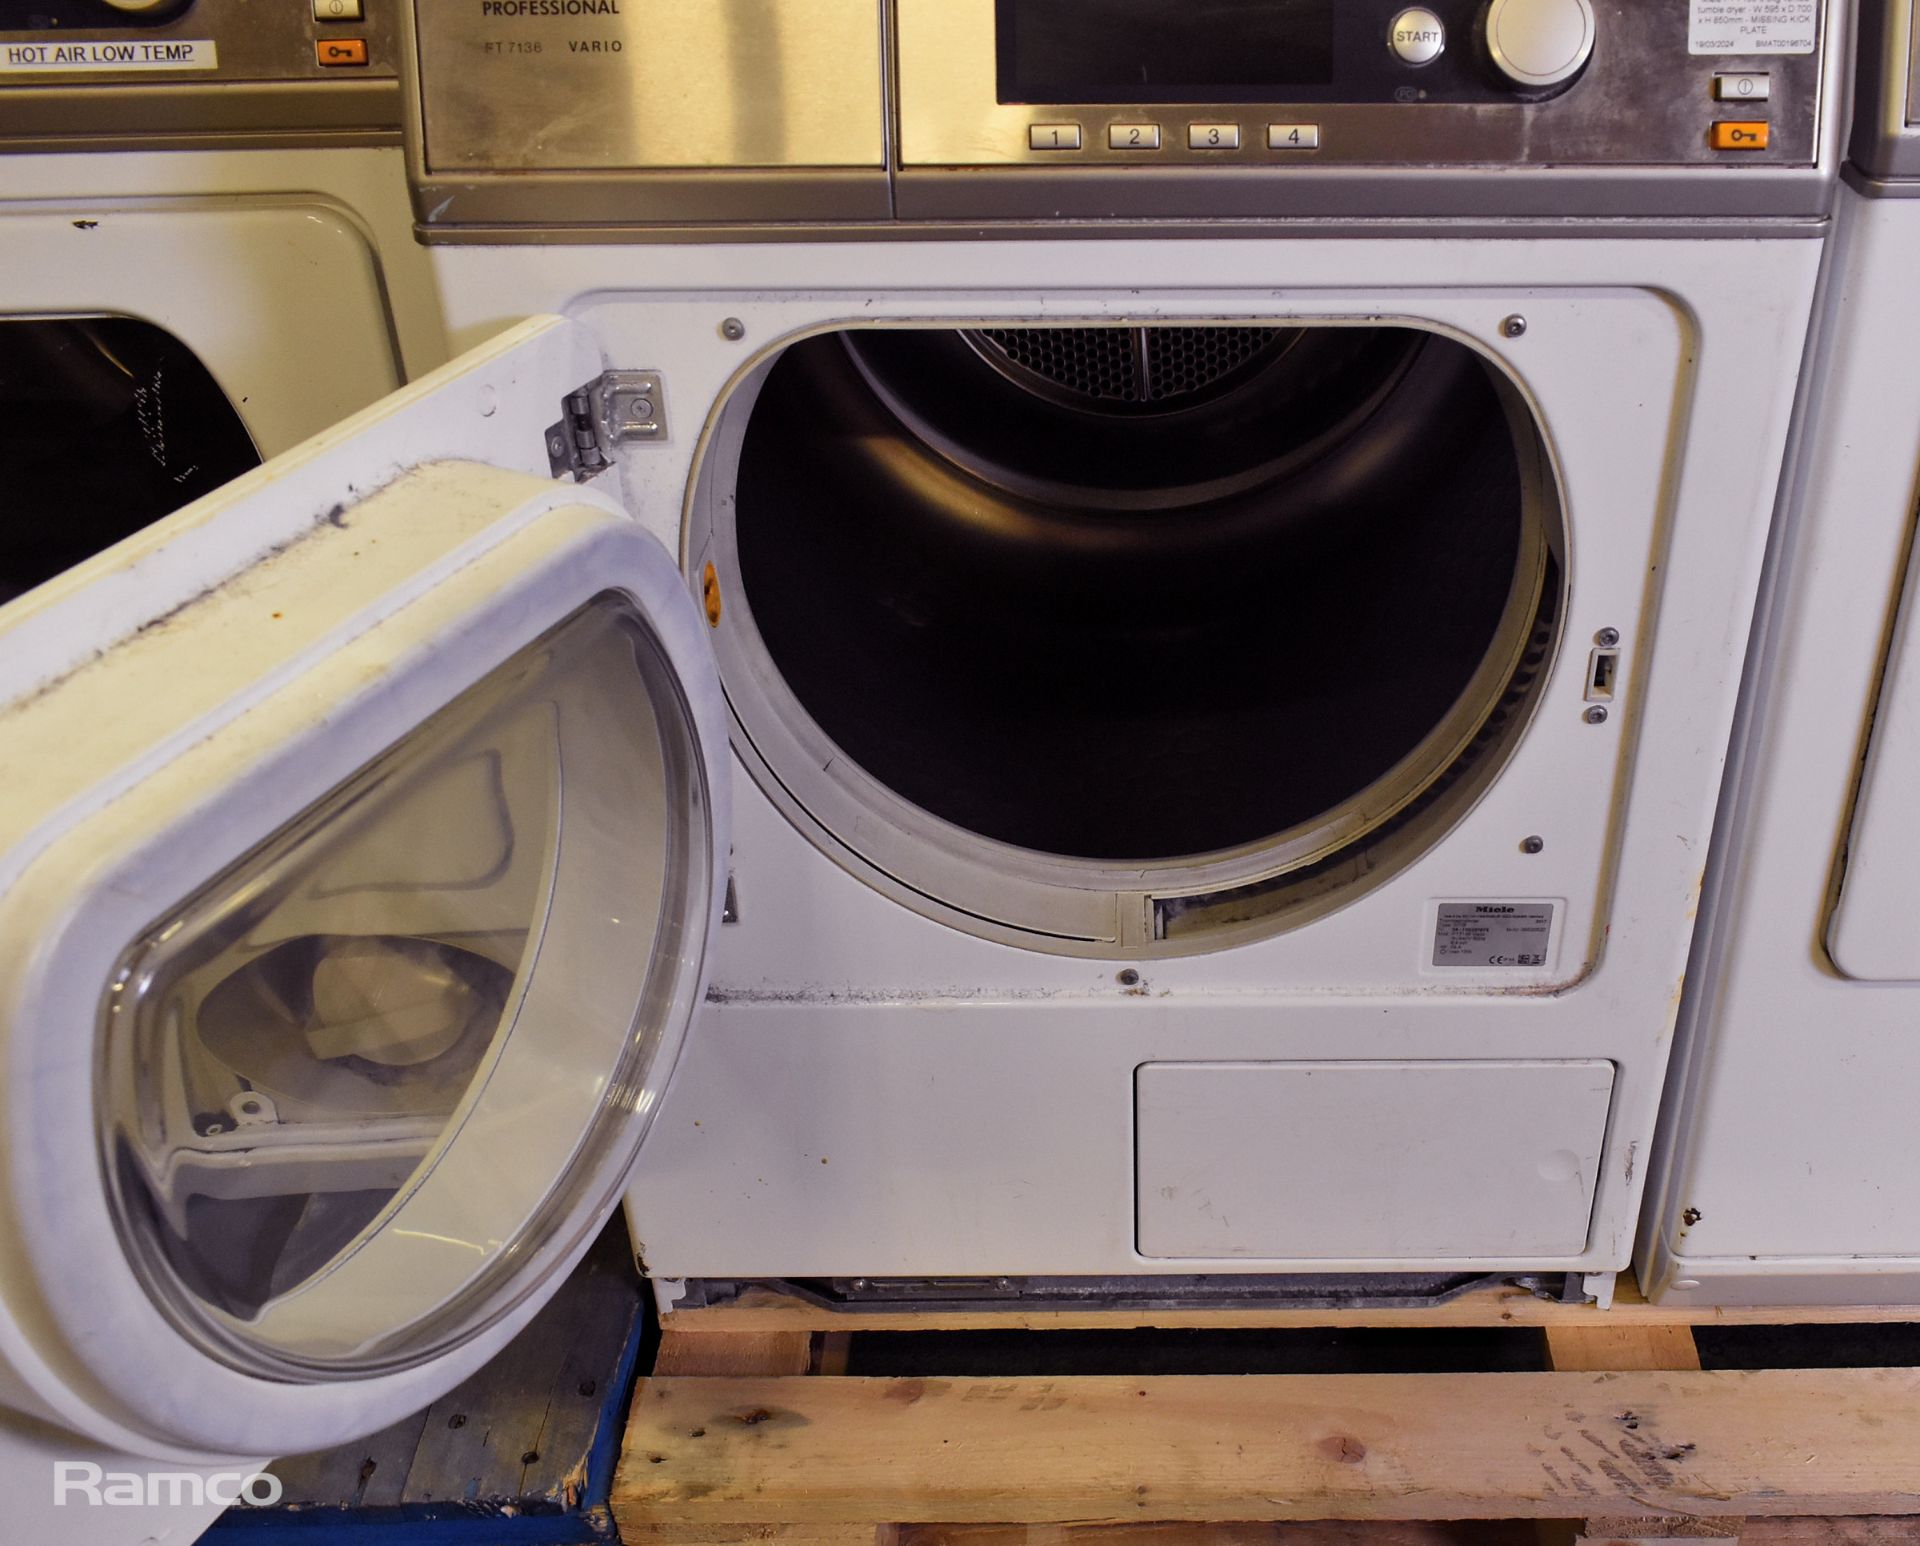 Miele PT 7136 6.5kg vented tumble dryer - W 595 x D 700 x H 850mm - MISSING KICK PLATE - Image 3 of 5